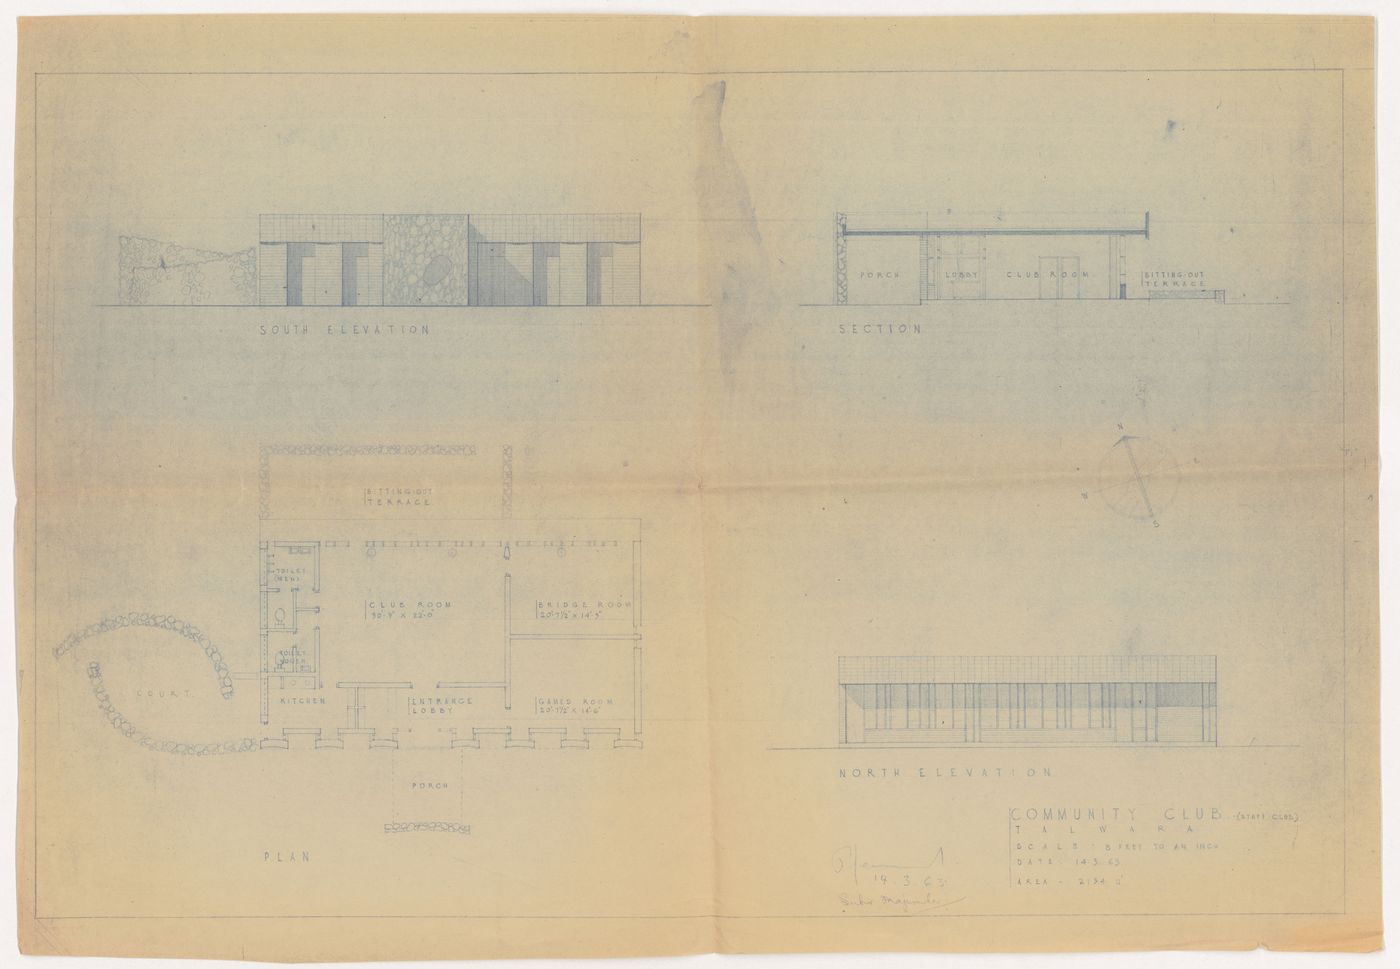 Elevations, sections, and plan for Community club (staff club), Talwara, India